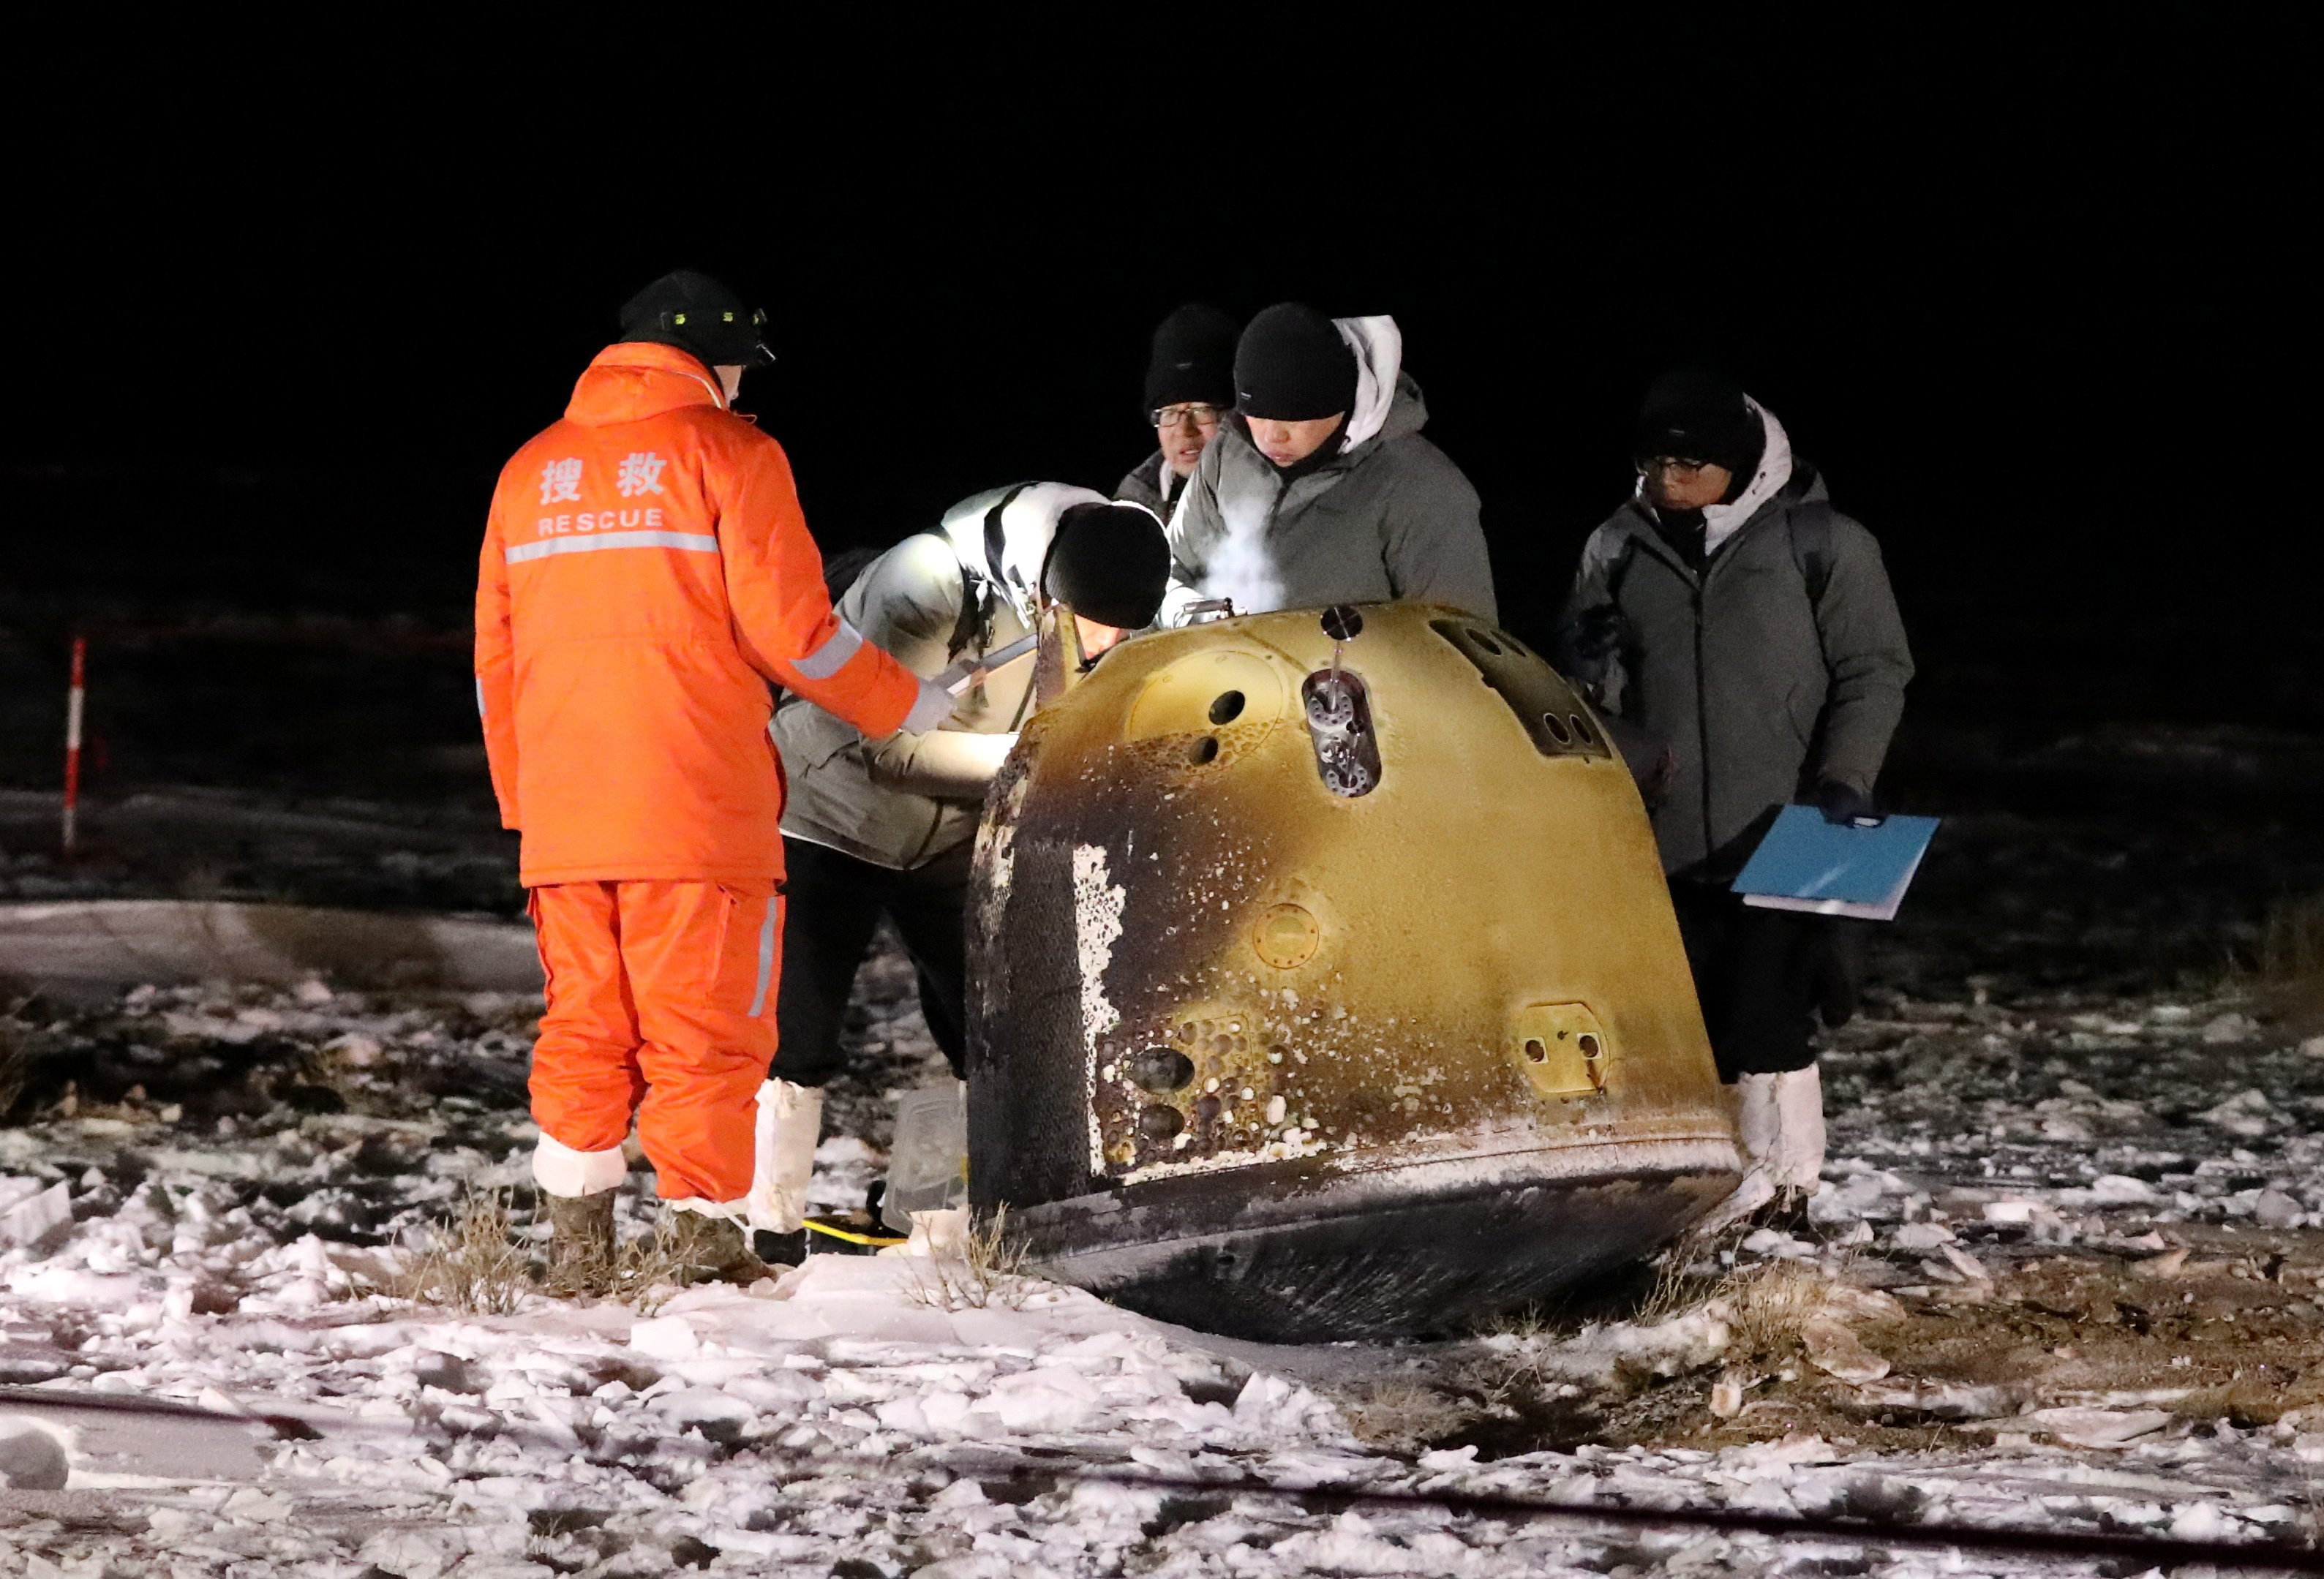 Researchers in Inner Mongolia work next to the landed Chang’e 5 lunar return capsule carrying moon samples in December 2020. Photo: Reuters